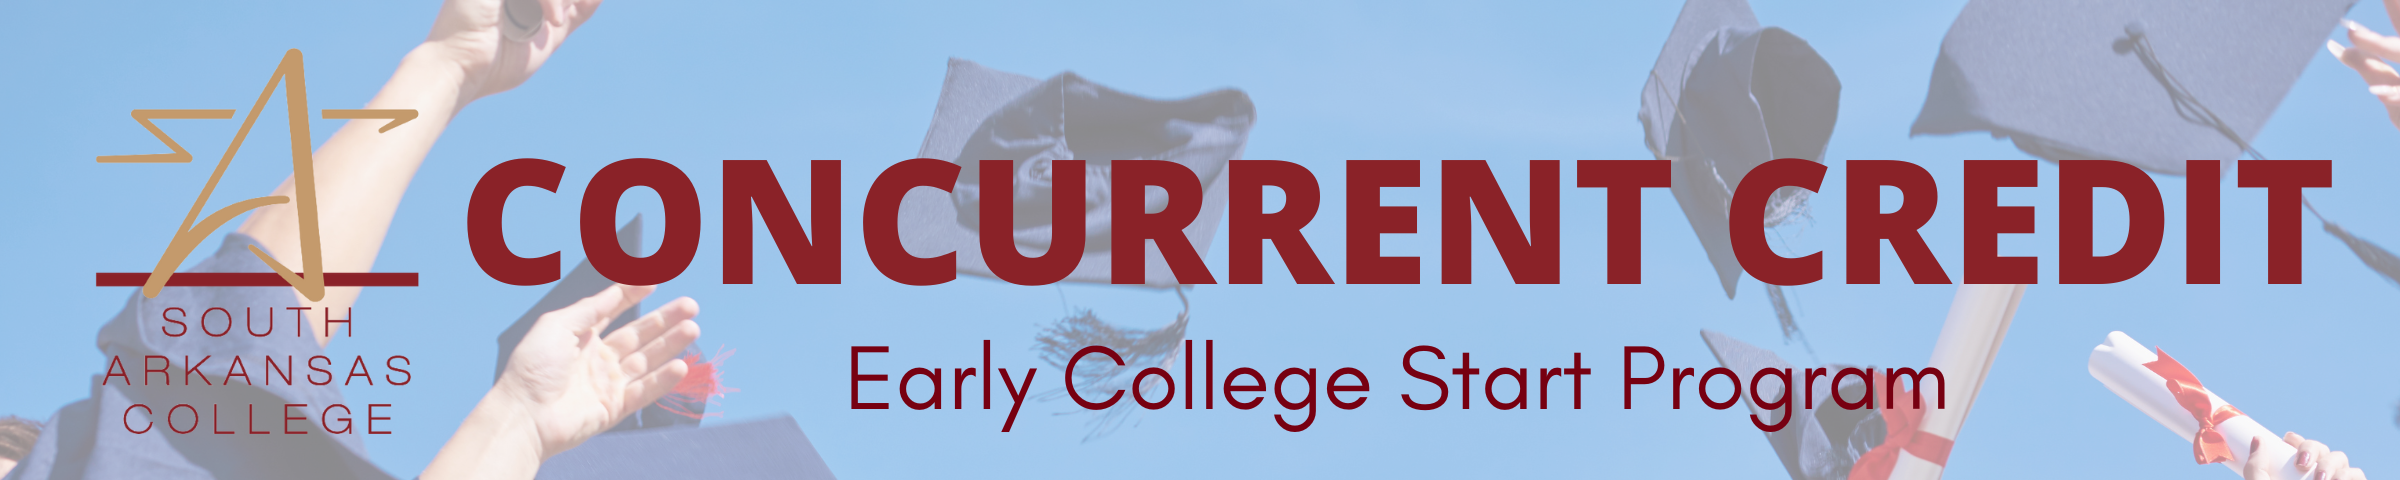 Concurrent Credit- Early College Start Program